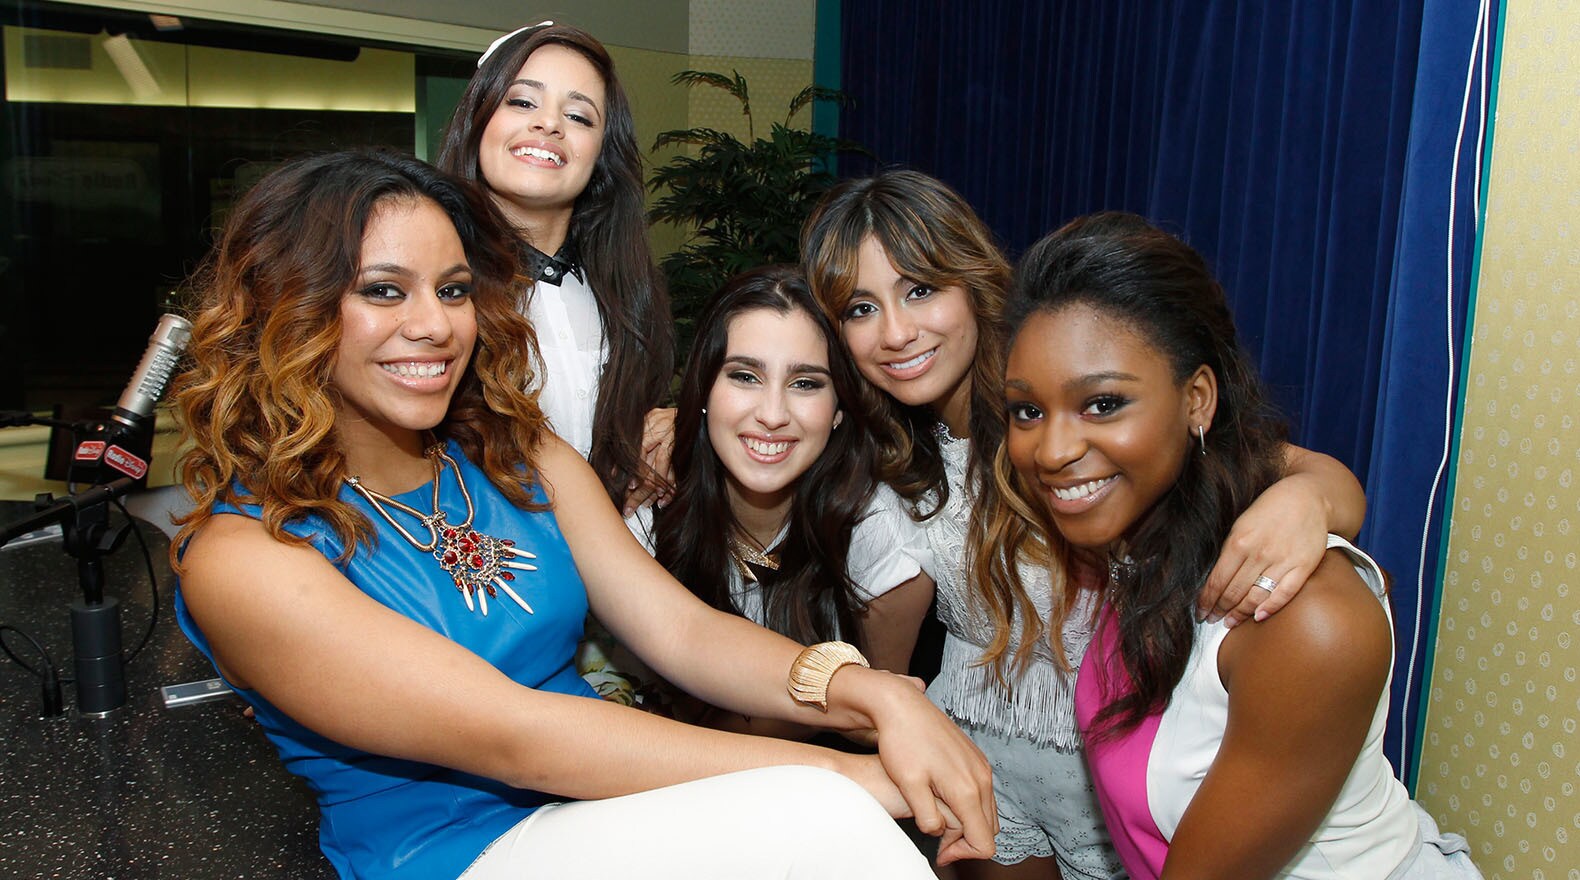 Our "N.B.T." featured artist Fifth Harmony were right at home!